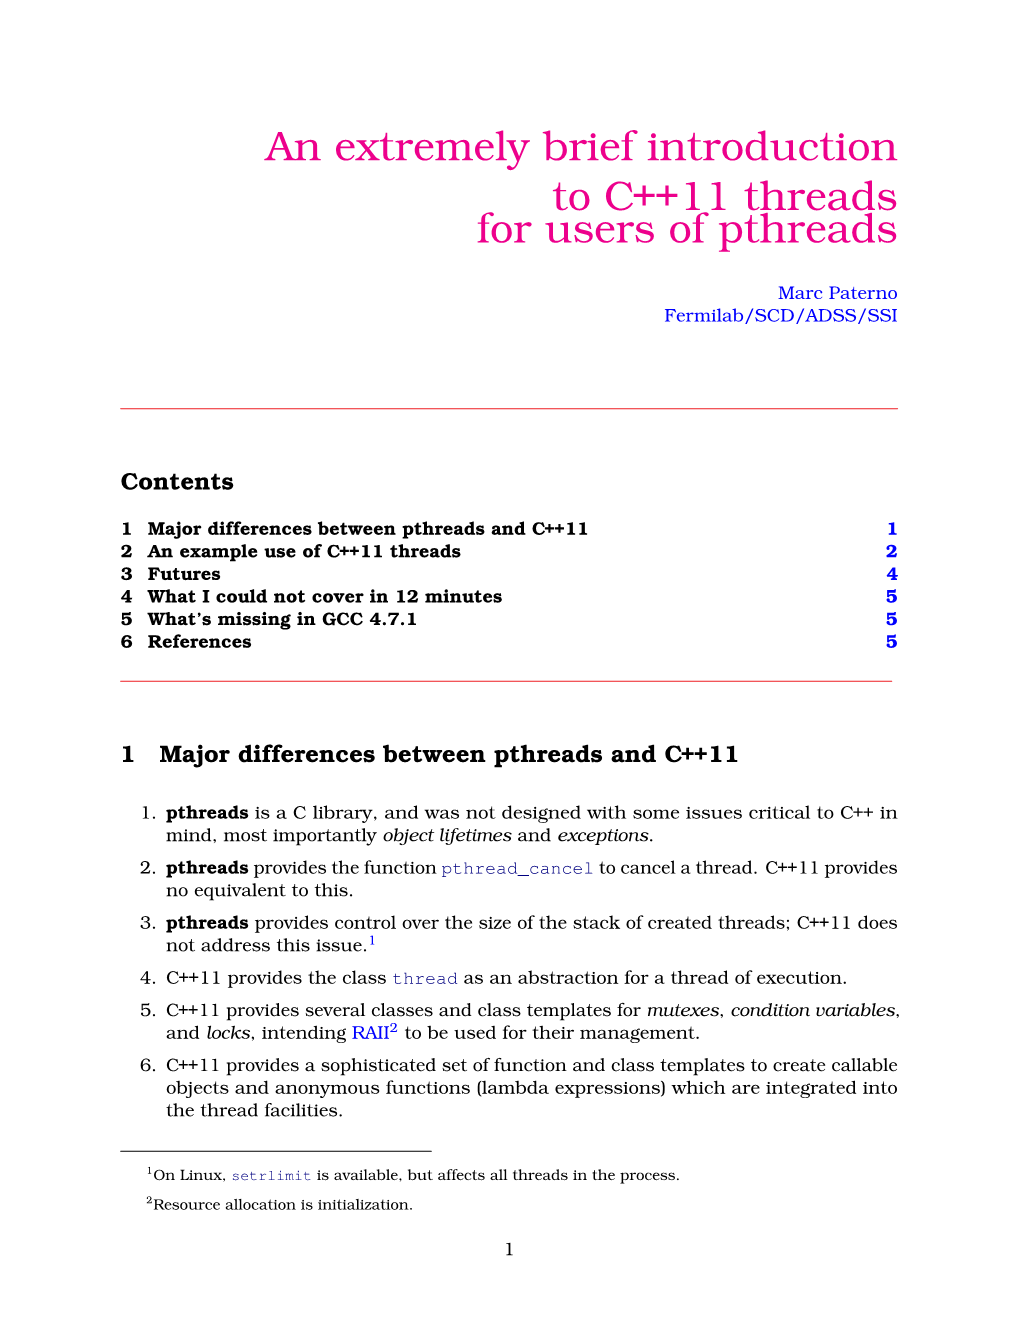 An Extremely Brief Introduction to C++11 Threads for Users of Pthreads